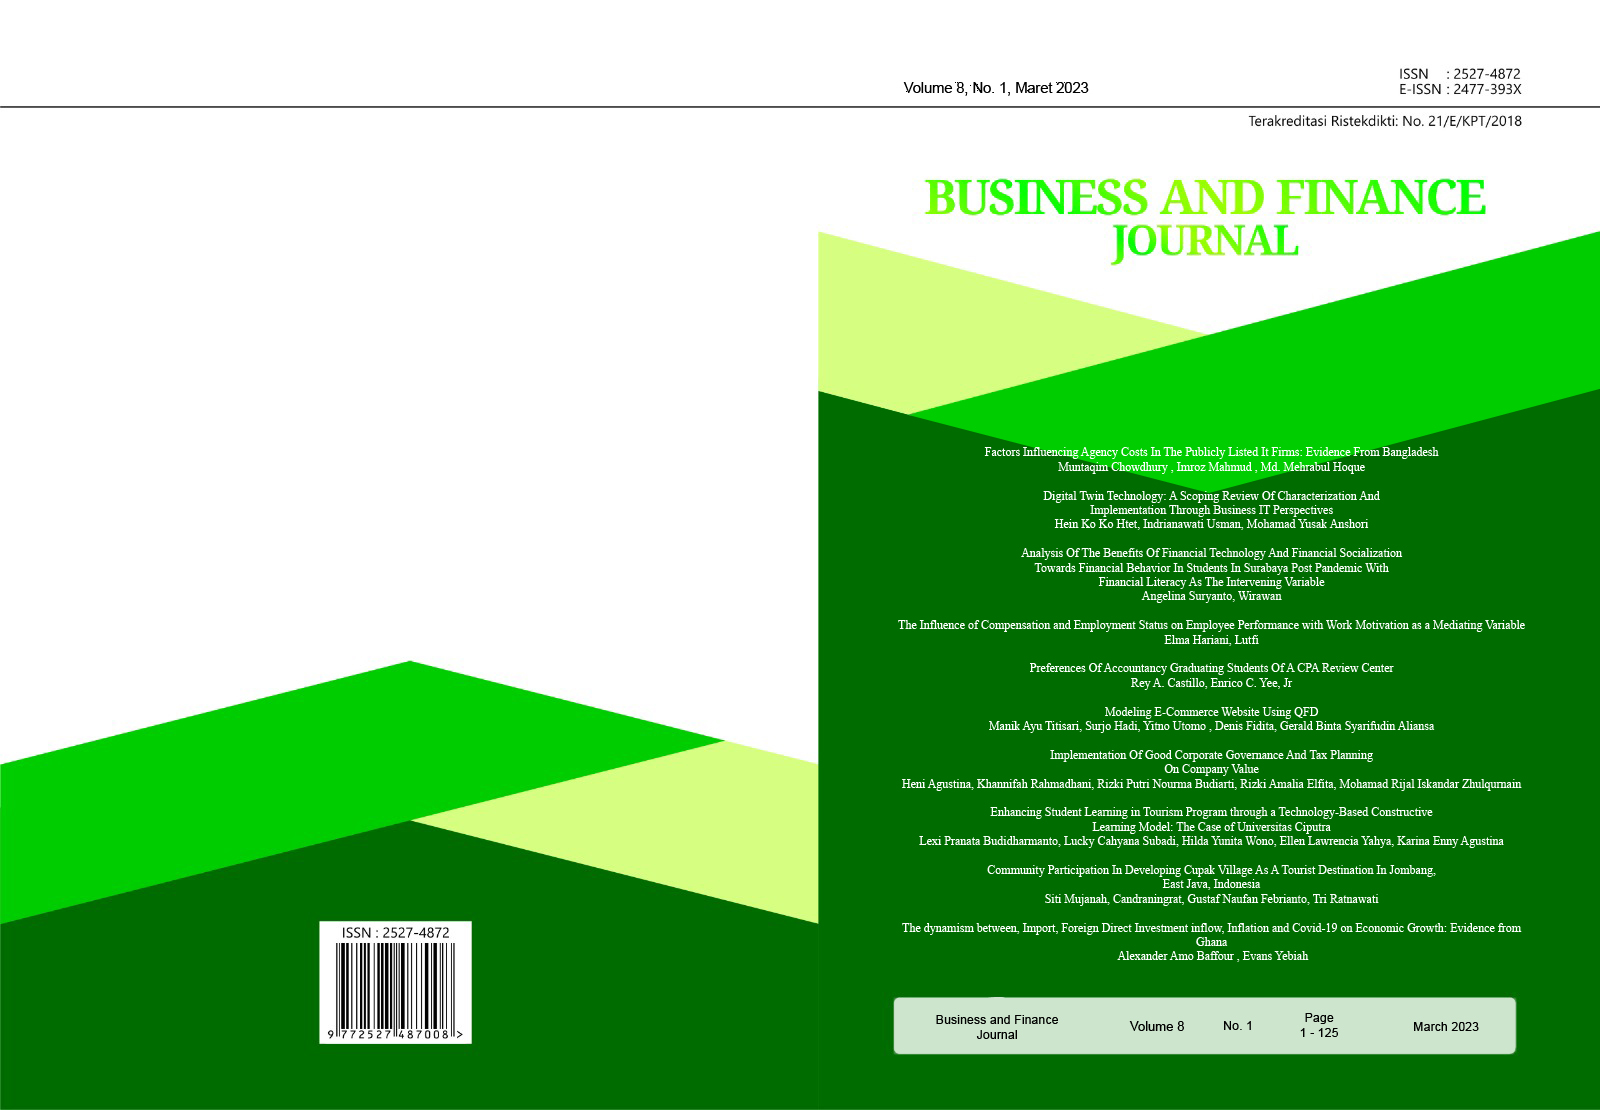 					View Vol. 8 No. 1 (2023): Business and Finance Journal
				